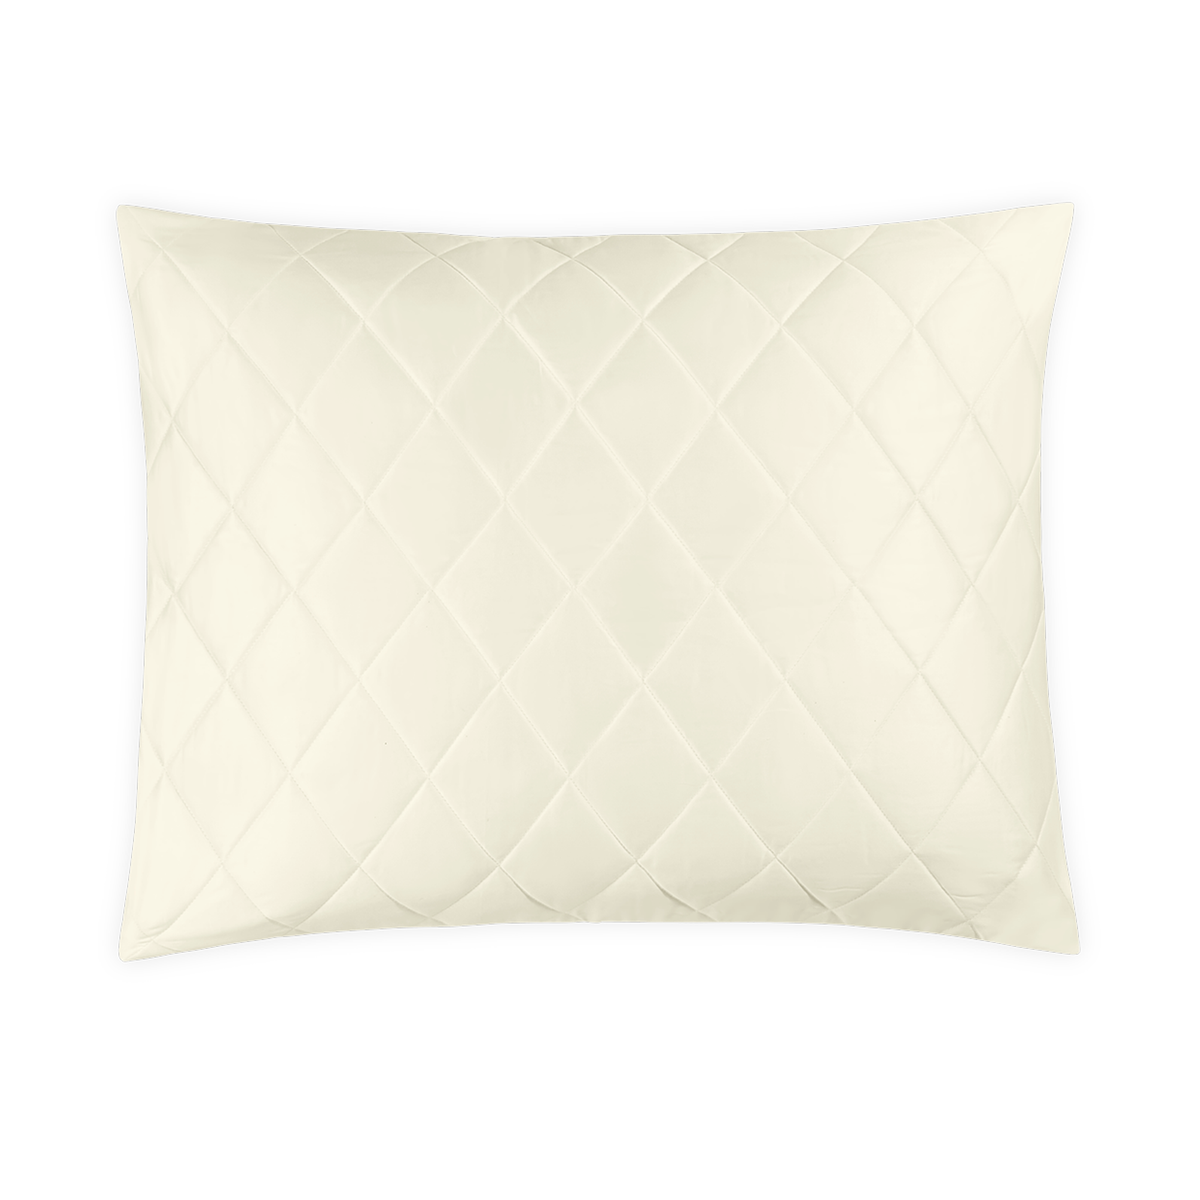 Silo Image of Matouk Nocturne Quilted Bedding Sham in Ivory